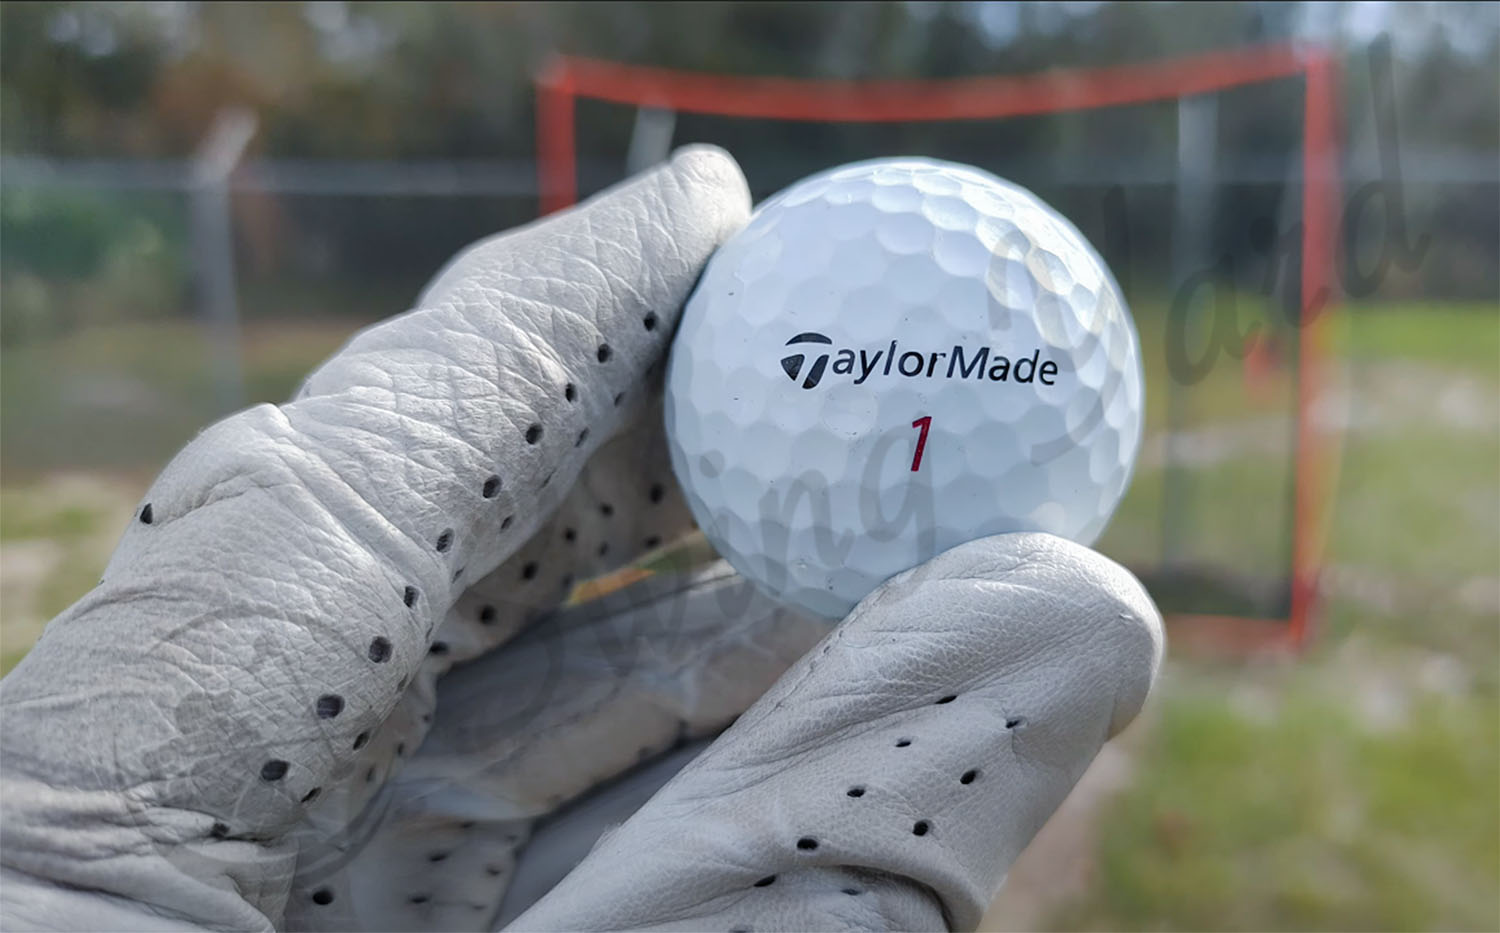 The TaylorMade Tour Response golf ball I tested at the golf course